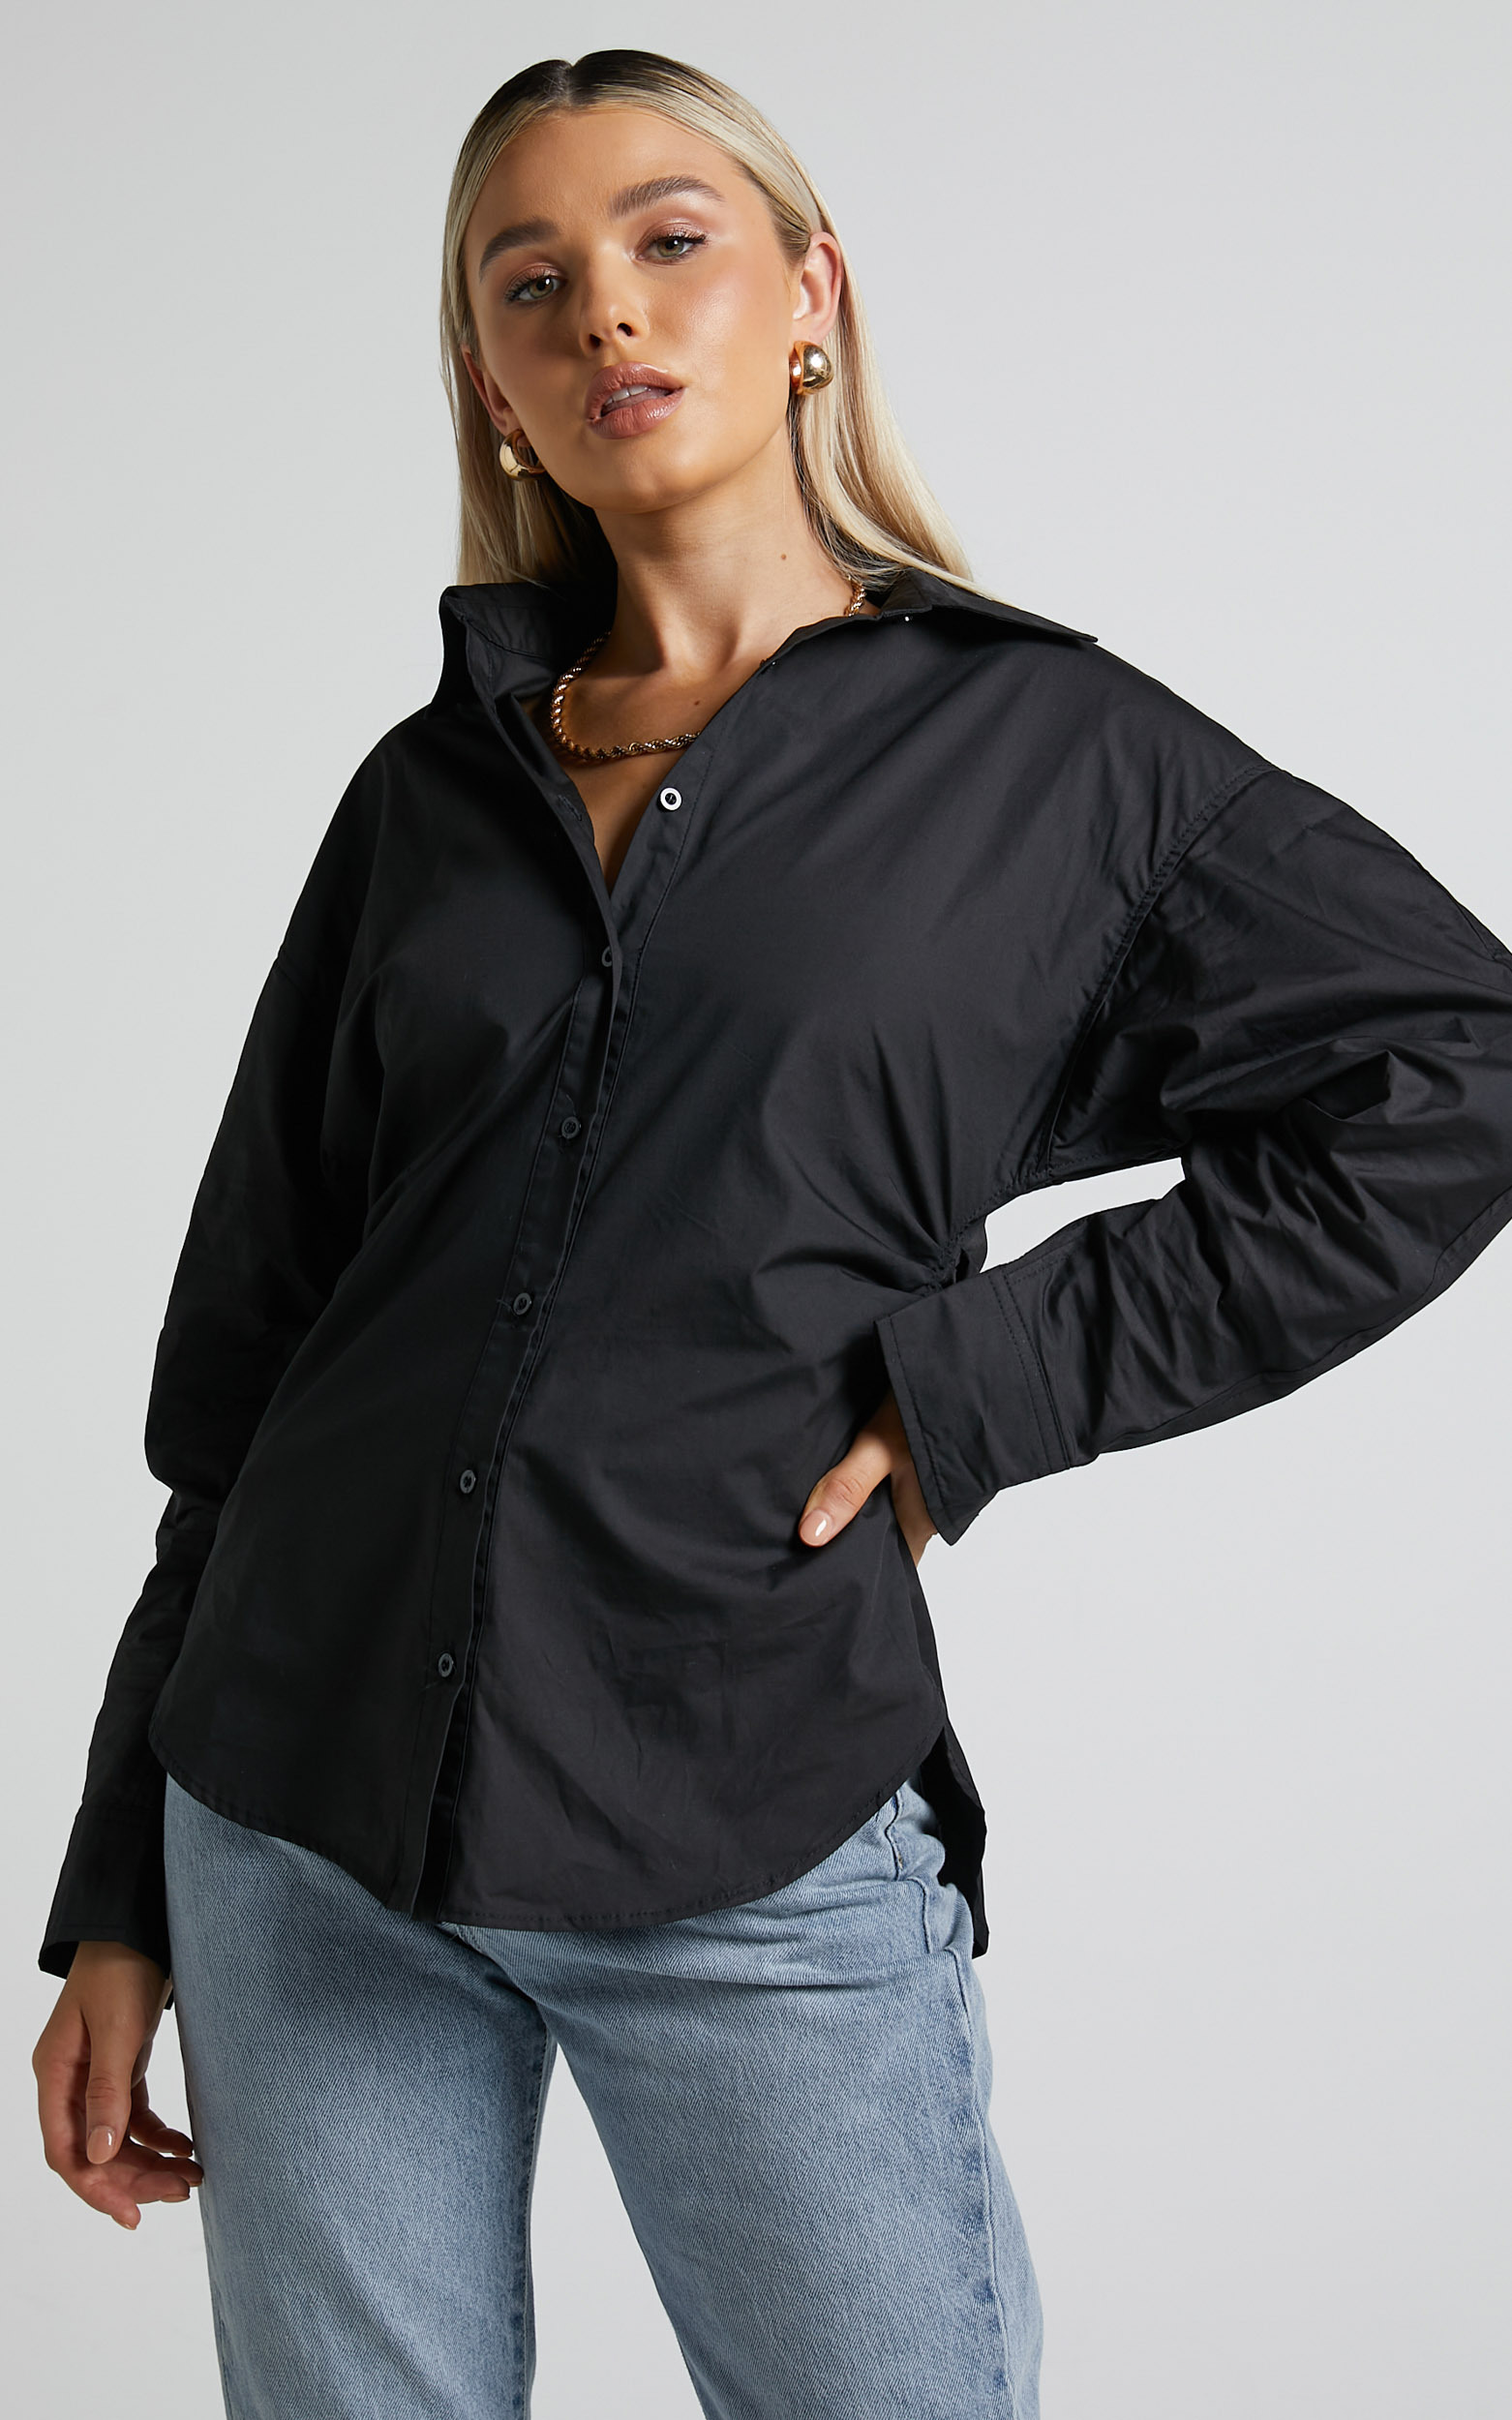 Tiva Long Sleeve  Fitted Button Up Shirt in Black - 06, BLK1, hi-res image number null